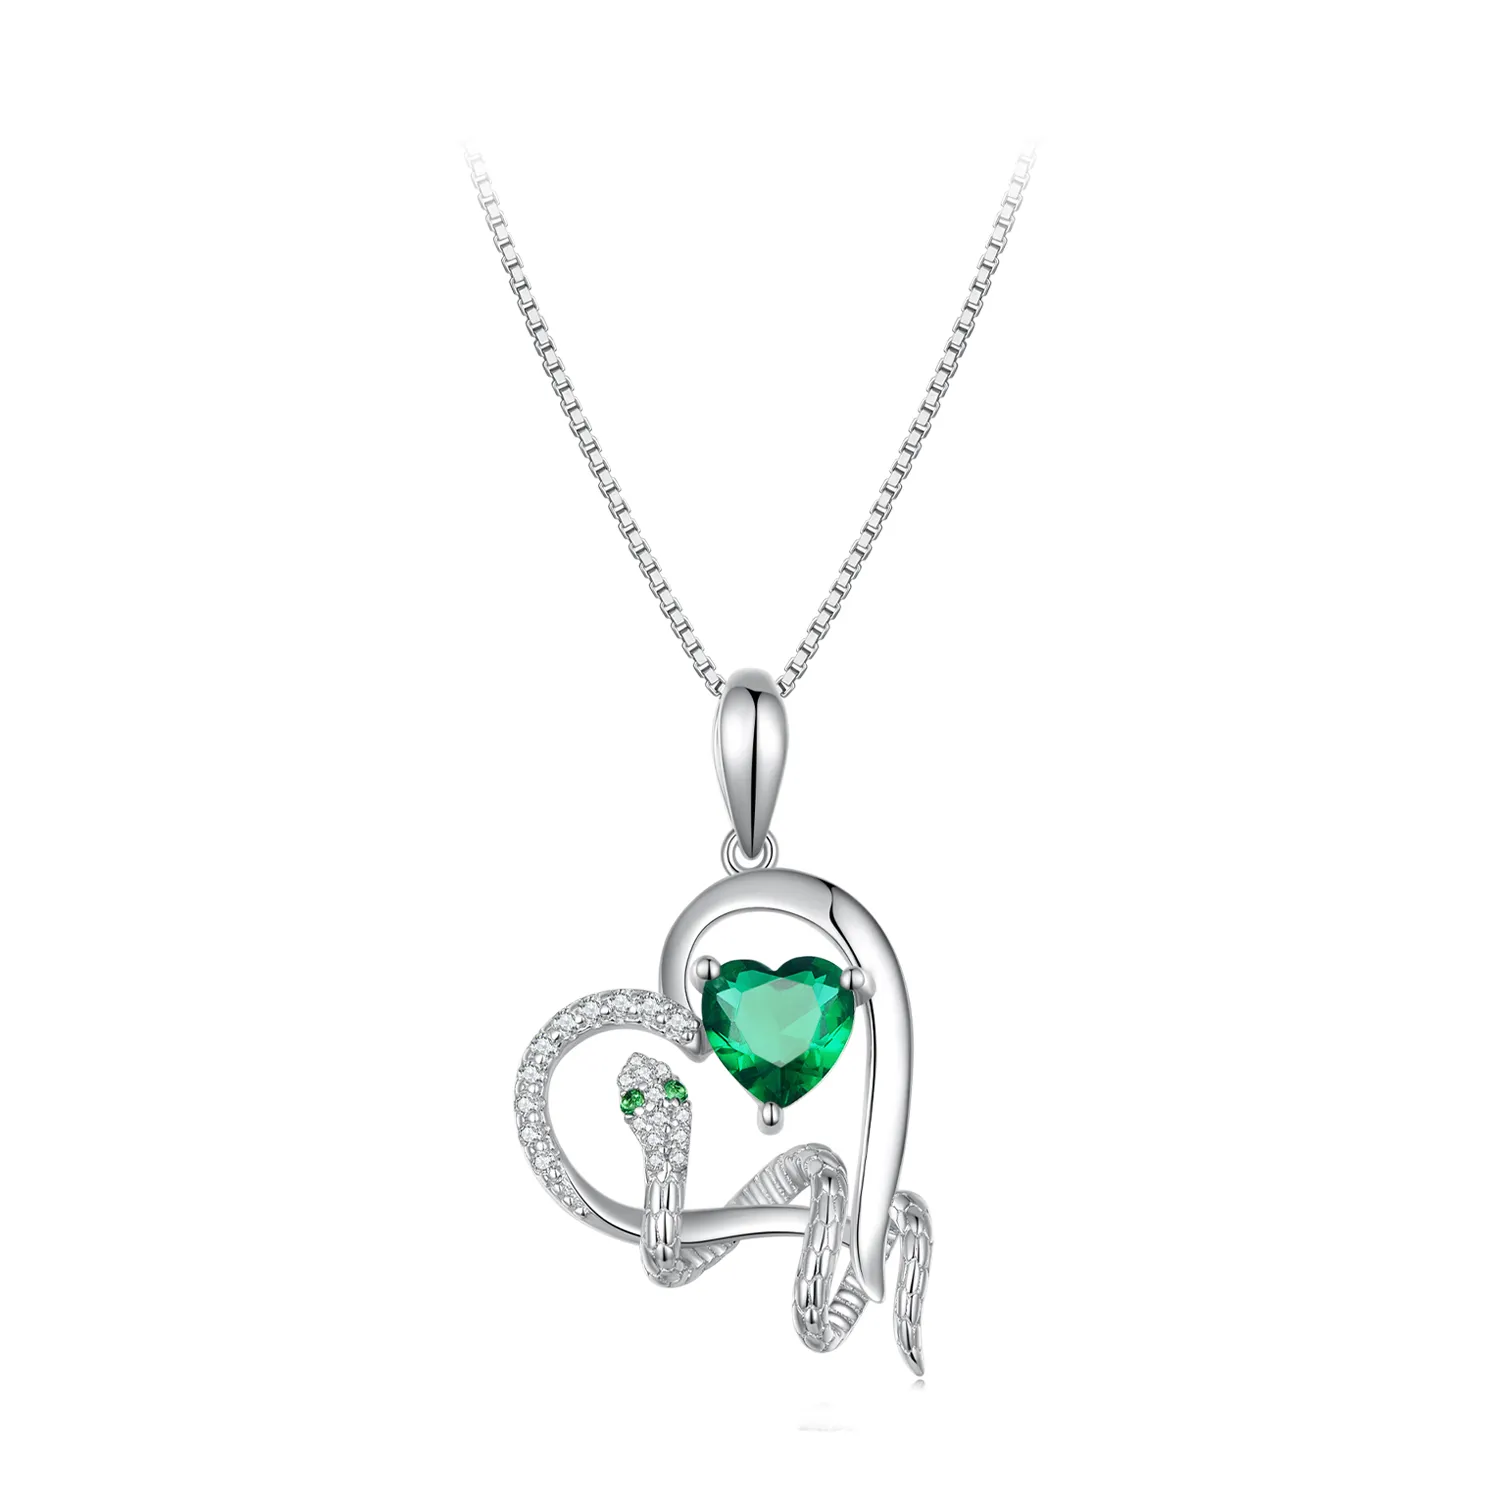 Pandora Style Necklace with Exquisite Snake Winding Heart Shape - BSN327